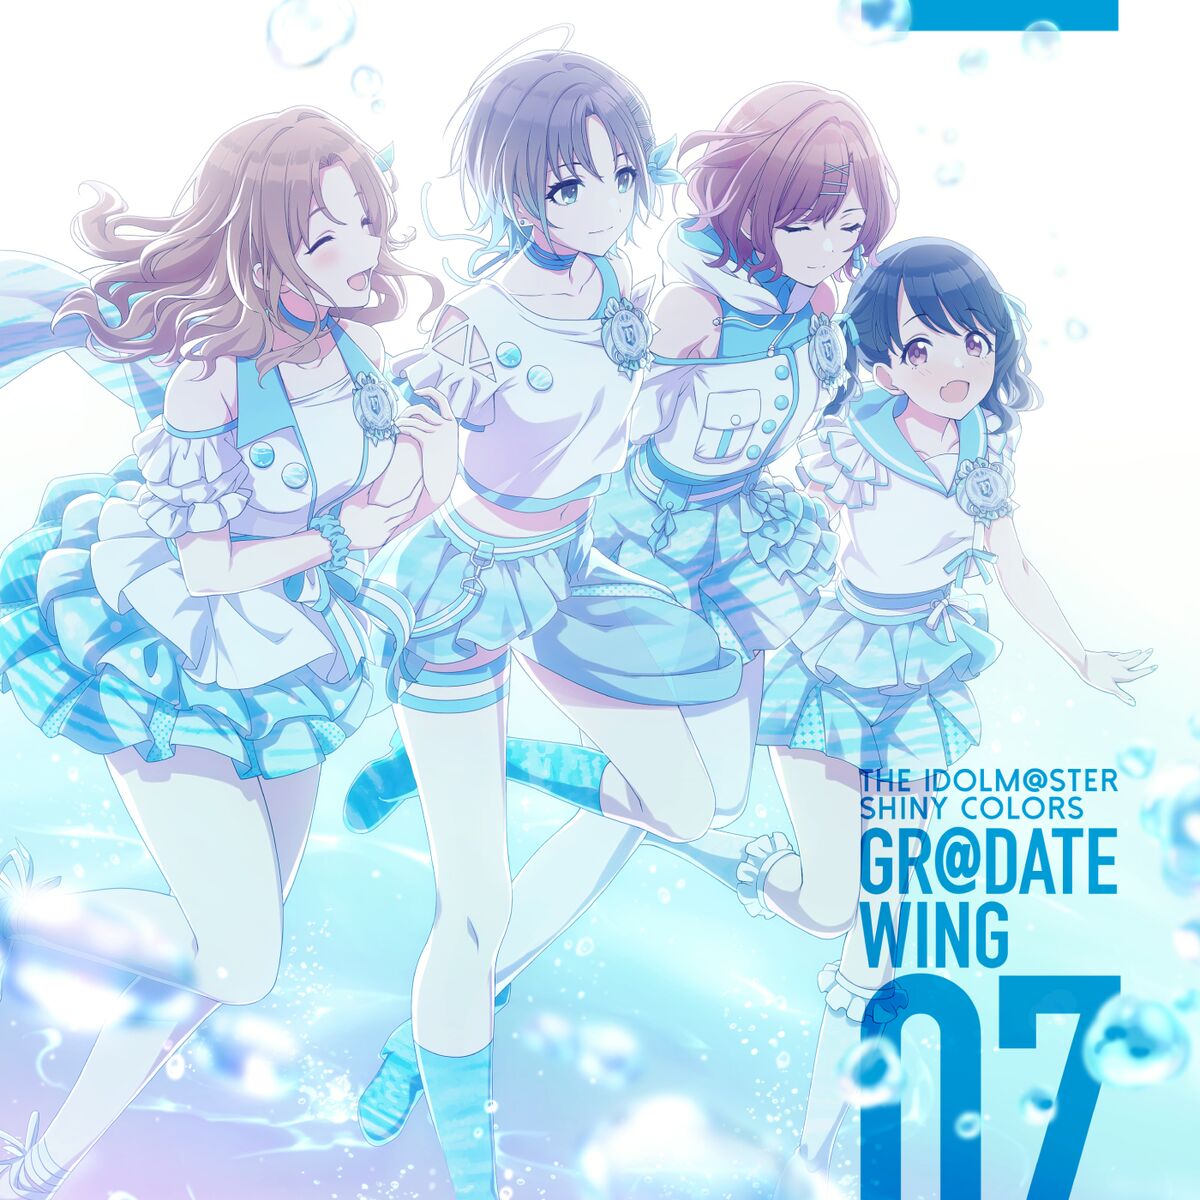 The Idolmster Shiny Colors Grdate Wing 07 Shinycolors Wiki